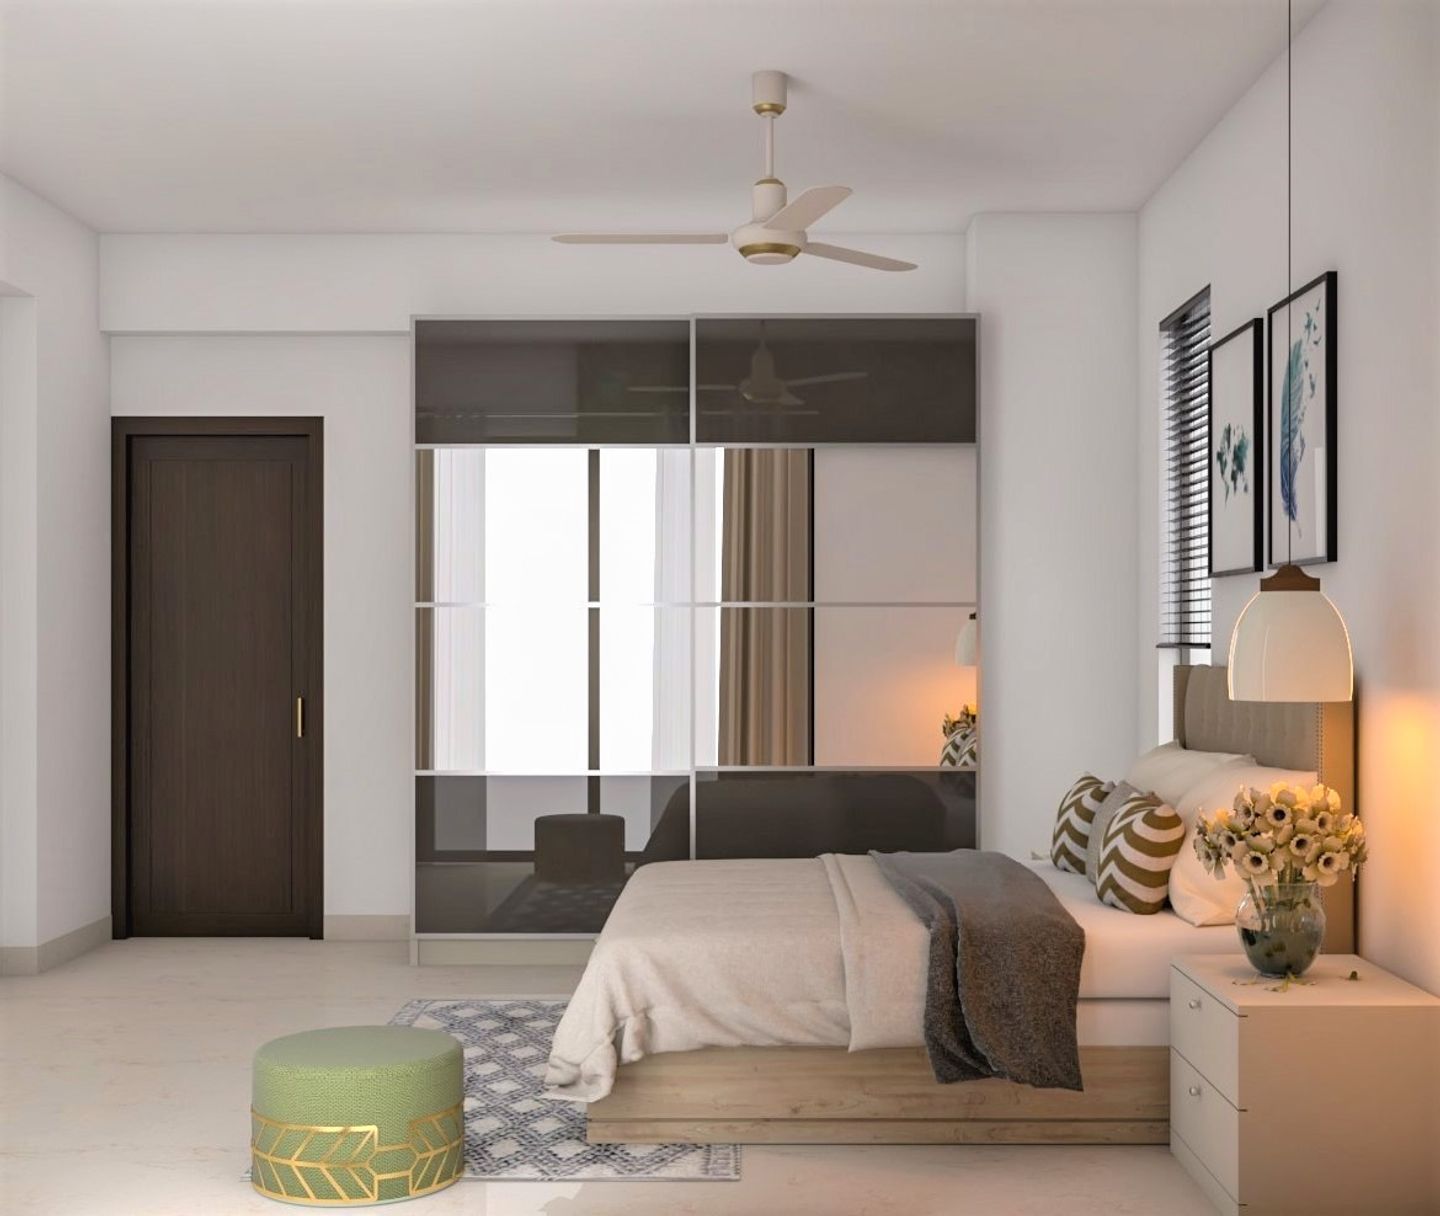 Spacious Master Bedroom with Sliding Wardrobes - Livspace